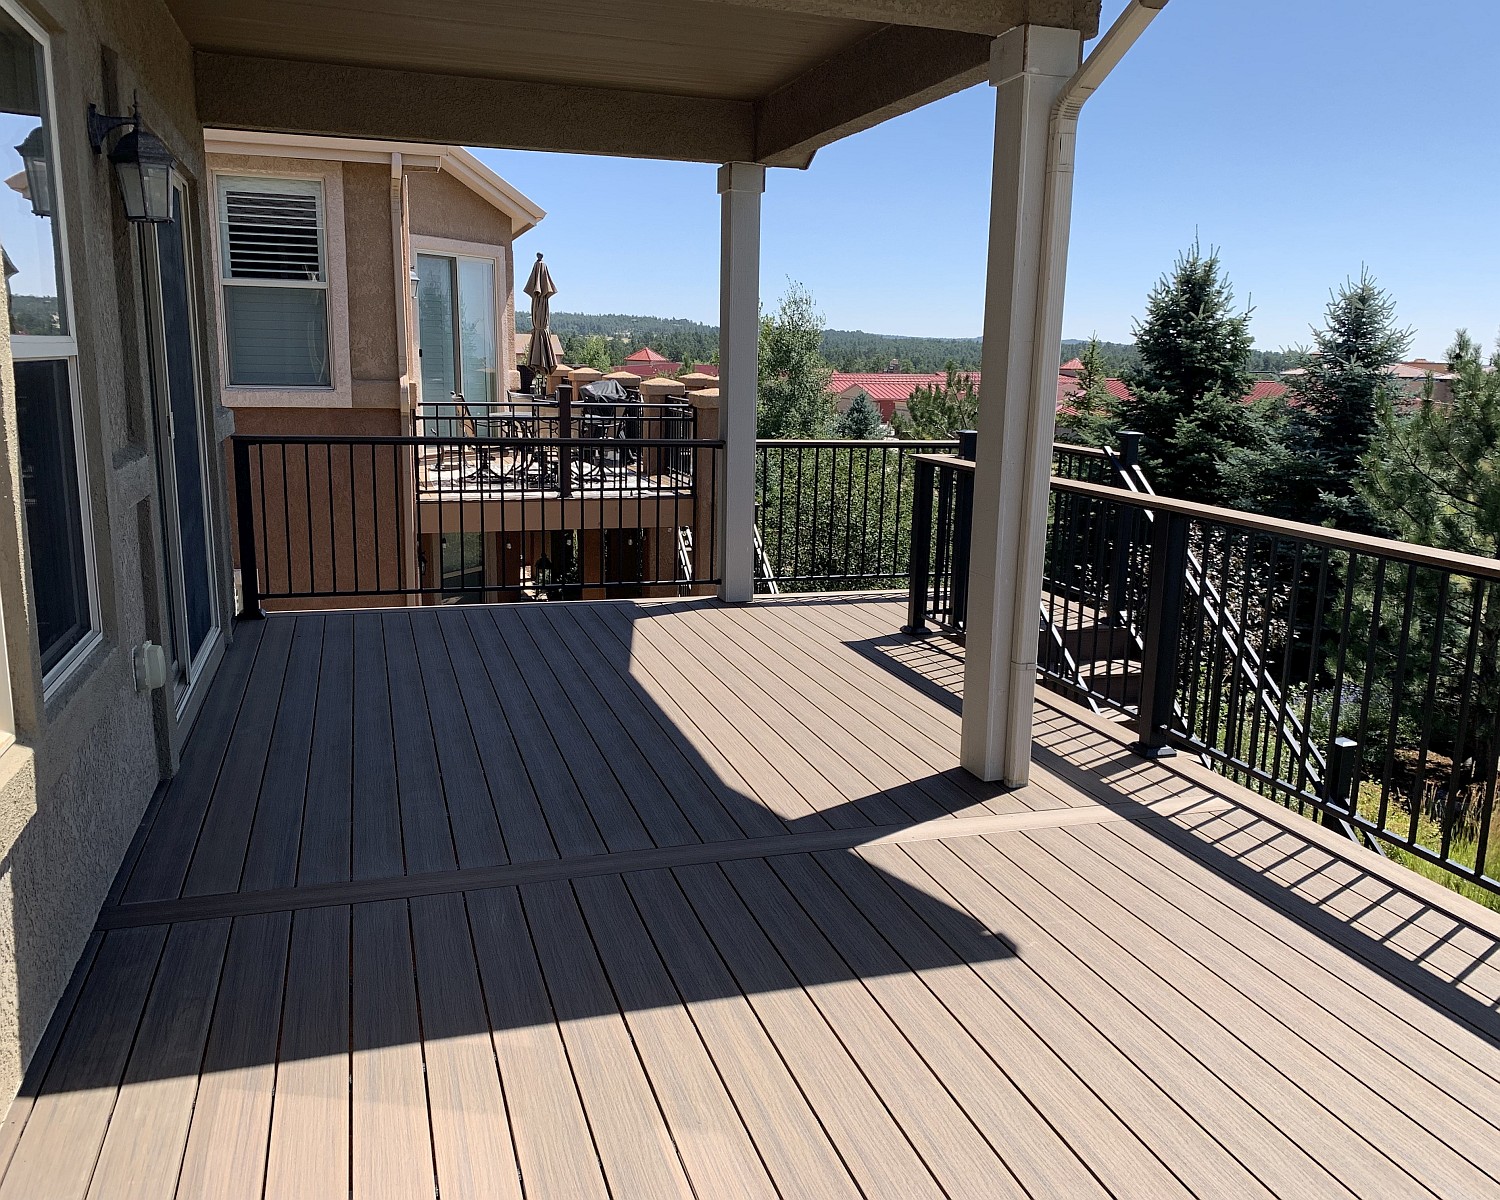 New deck built with Deckorators composite material and a Fortress metal railing. It also features a deck cover which was original to the house.